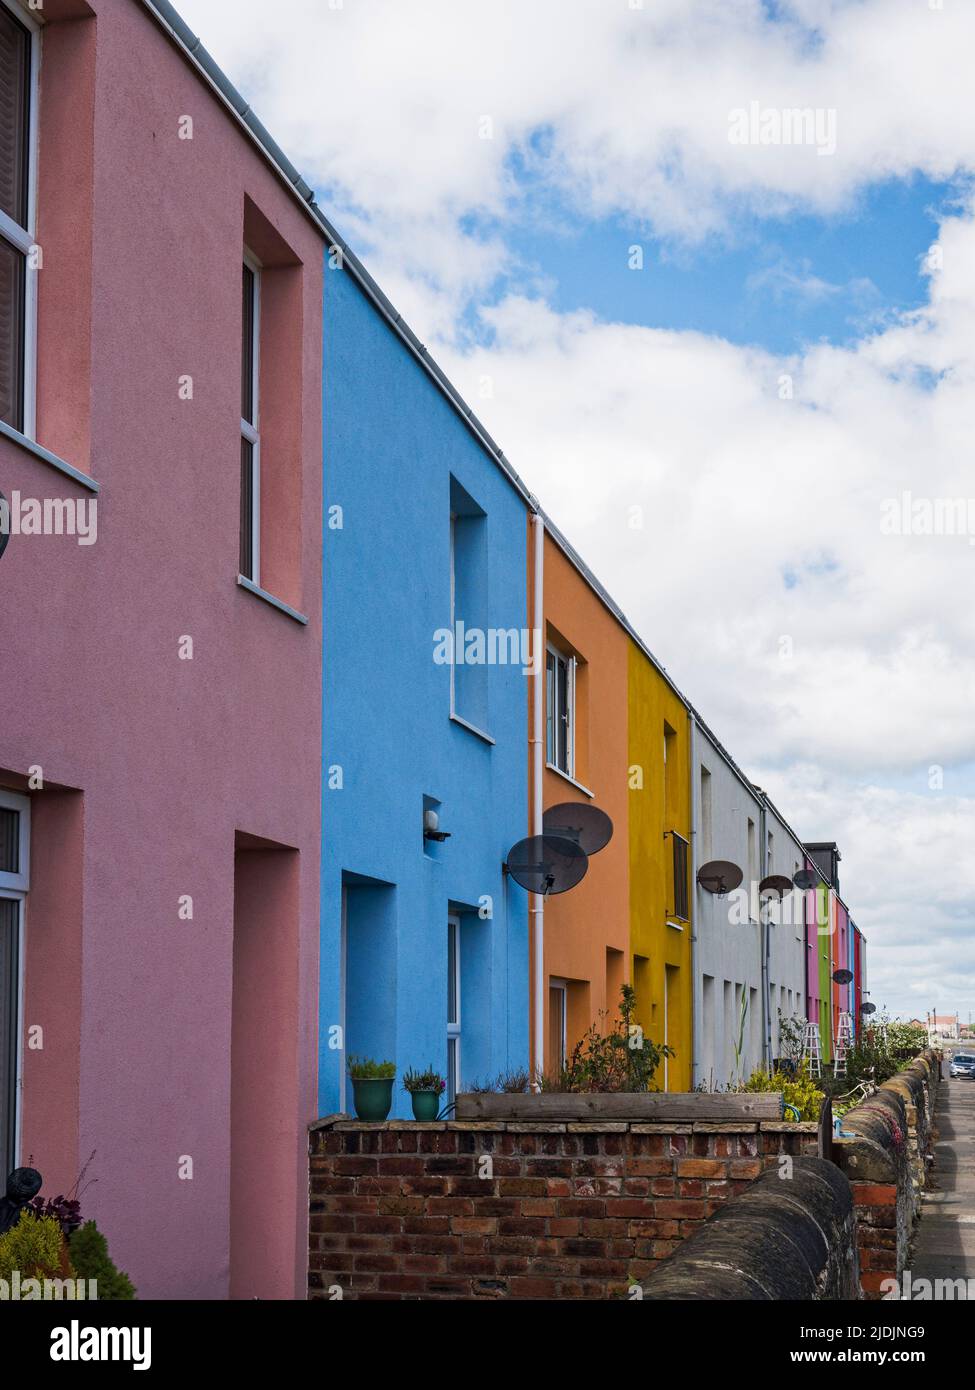 A terrace of houses in Cambois, Northumberland, UK painted in various colours Stock Photo